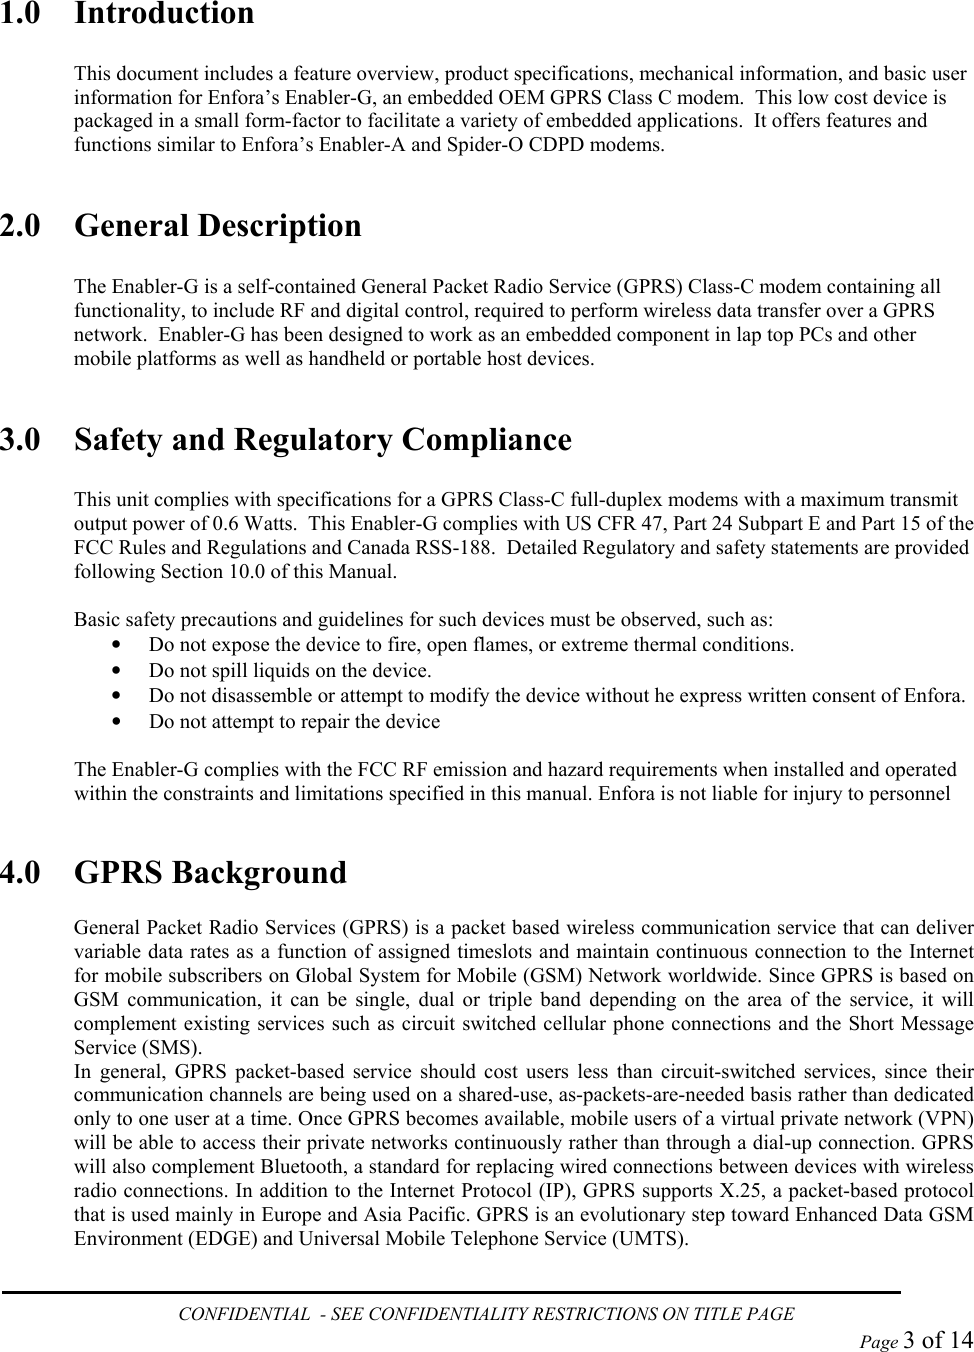  1.0 Introduction  This document includes a feature overview, product specifications, mechanical information, and basic user information for Enfora’s Enabler-G, an embedded OEM GPRS Class C modem.  This low cost device is packaged in a small form-factor to facilitate a variety of embedded applications.  It offers features and functions similar to Enfora’s Enabler-A and Spider-O CDPD modems.  2.0 General Description  The Enabler-G is a self-contained General Packet Radio Service (GPRS) Class-C modem containing all functionality, to include RF and digital control, required to perform wireless data transfer over a GPRS network.  Enabler-G has been designed to work as an embedded component in lap top PCs and other mobile platforms as well as handheld or portable host devices.  3.0  Safety and Regulatory Compliance  This unit complies with specifications for a GPRS Class-C full-duplex modems with a maximum transmit output power of 0.6 Watts.  This Enabler-G complies with US CFR 47, Part 24 Subpart E and Part 15 of the FCC Rules and Regulations and Canada RSS-188.  Detailed Regulatory and safety statements are provided following Section 10.0 of this Manual.  Basic safety precautions and guidelines for such devices must be observed, such as: •  Do not expose the device to fire, open flames, or extreme thermal conditions. •  Do not spill liquids on the device. •  Do not disassemble or attempt to modify the device without he express written consent of Enfora. •  Do not attempt to repair the device  The Enabler-G complies with the FCC RF emission and hazard requirements when installed and operated within the constraints and limitations specified in this manual. Enfora is not liable for injury to personnel   4.0 GPRS Background  General Packet Radio Services (GPRS) is a packet based wireless communication service that can deliver variable data rates as a function of assigned timeslots and maintain continuous connection to the Internet for mobile subscribers on Global System for Mobile (GSM) Network worldwide. Since GPRS is based on GSM communication, it can be single, dual or triple band depending on the area of the service, it will complement existing services such as circuit switched cellular phone connections and the Short Message Service (SMS).  In general, GPRS packet-based service should cost users less than circuit-switched services, since their communication channels are being used on a shared-use, as-packets-are-needed basis rather than dedicated only to one user at a time. Once GPRS becomes available, mobile users of a virtual private network (VPN) will be able to access their private networks continuously rather than through a dial-up connection. GPRS will also complement Bluetooth, a standard for replacing wired connections between devices with wireless radio connections. In addition to the Internet Protocol (IP), GPRS supports X.25, a packet-based protocol that is used mainly in Europe and Asia Pacific. GPRS is an evolutionary step toward Enhanced Data GSM Environment (EDGE) and Universal Mobile Telephone Service (UMTS).   CONFIDENTIAL  - SEE CONFIDENTIALITY RESTRICTIONS ON TITLE PAGE  Page 3 of 14 